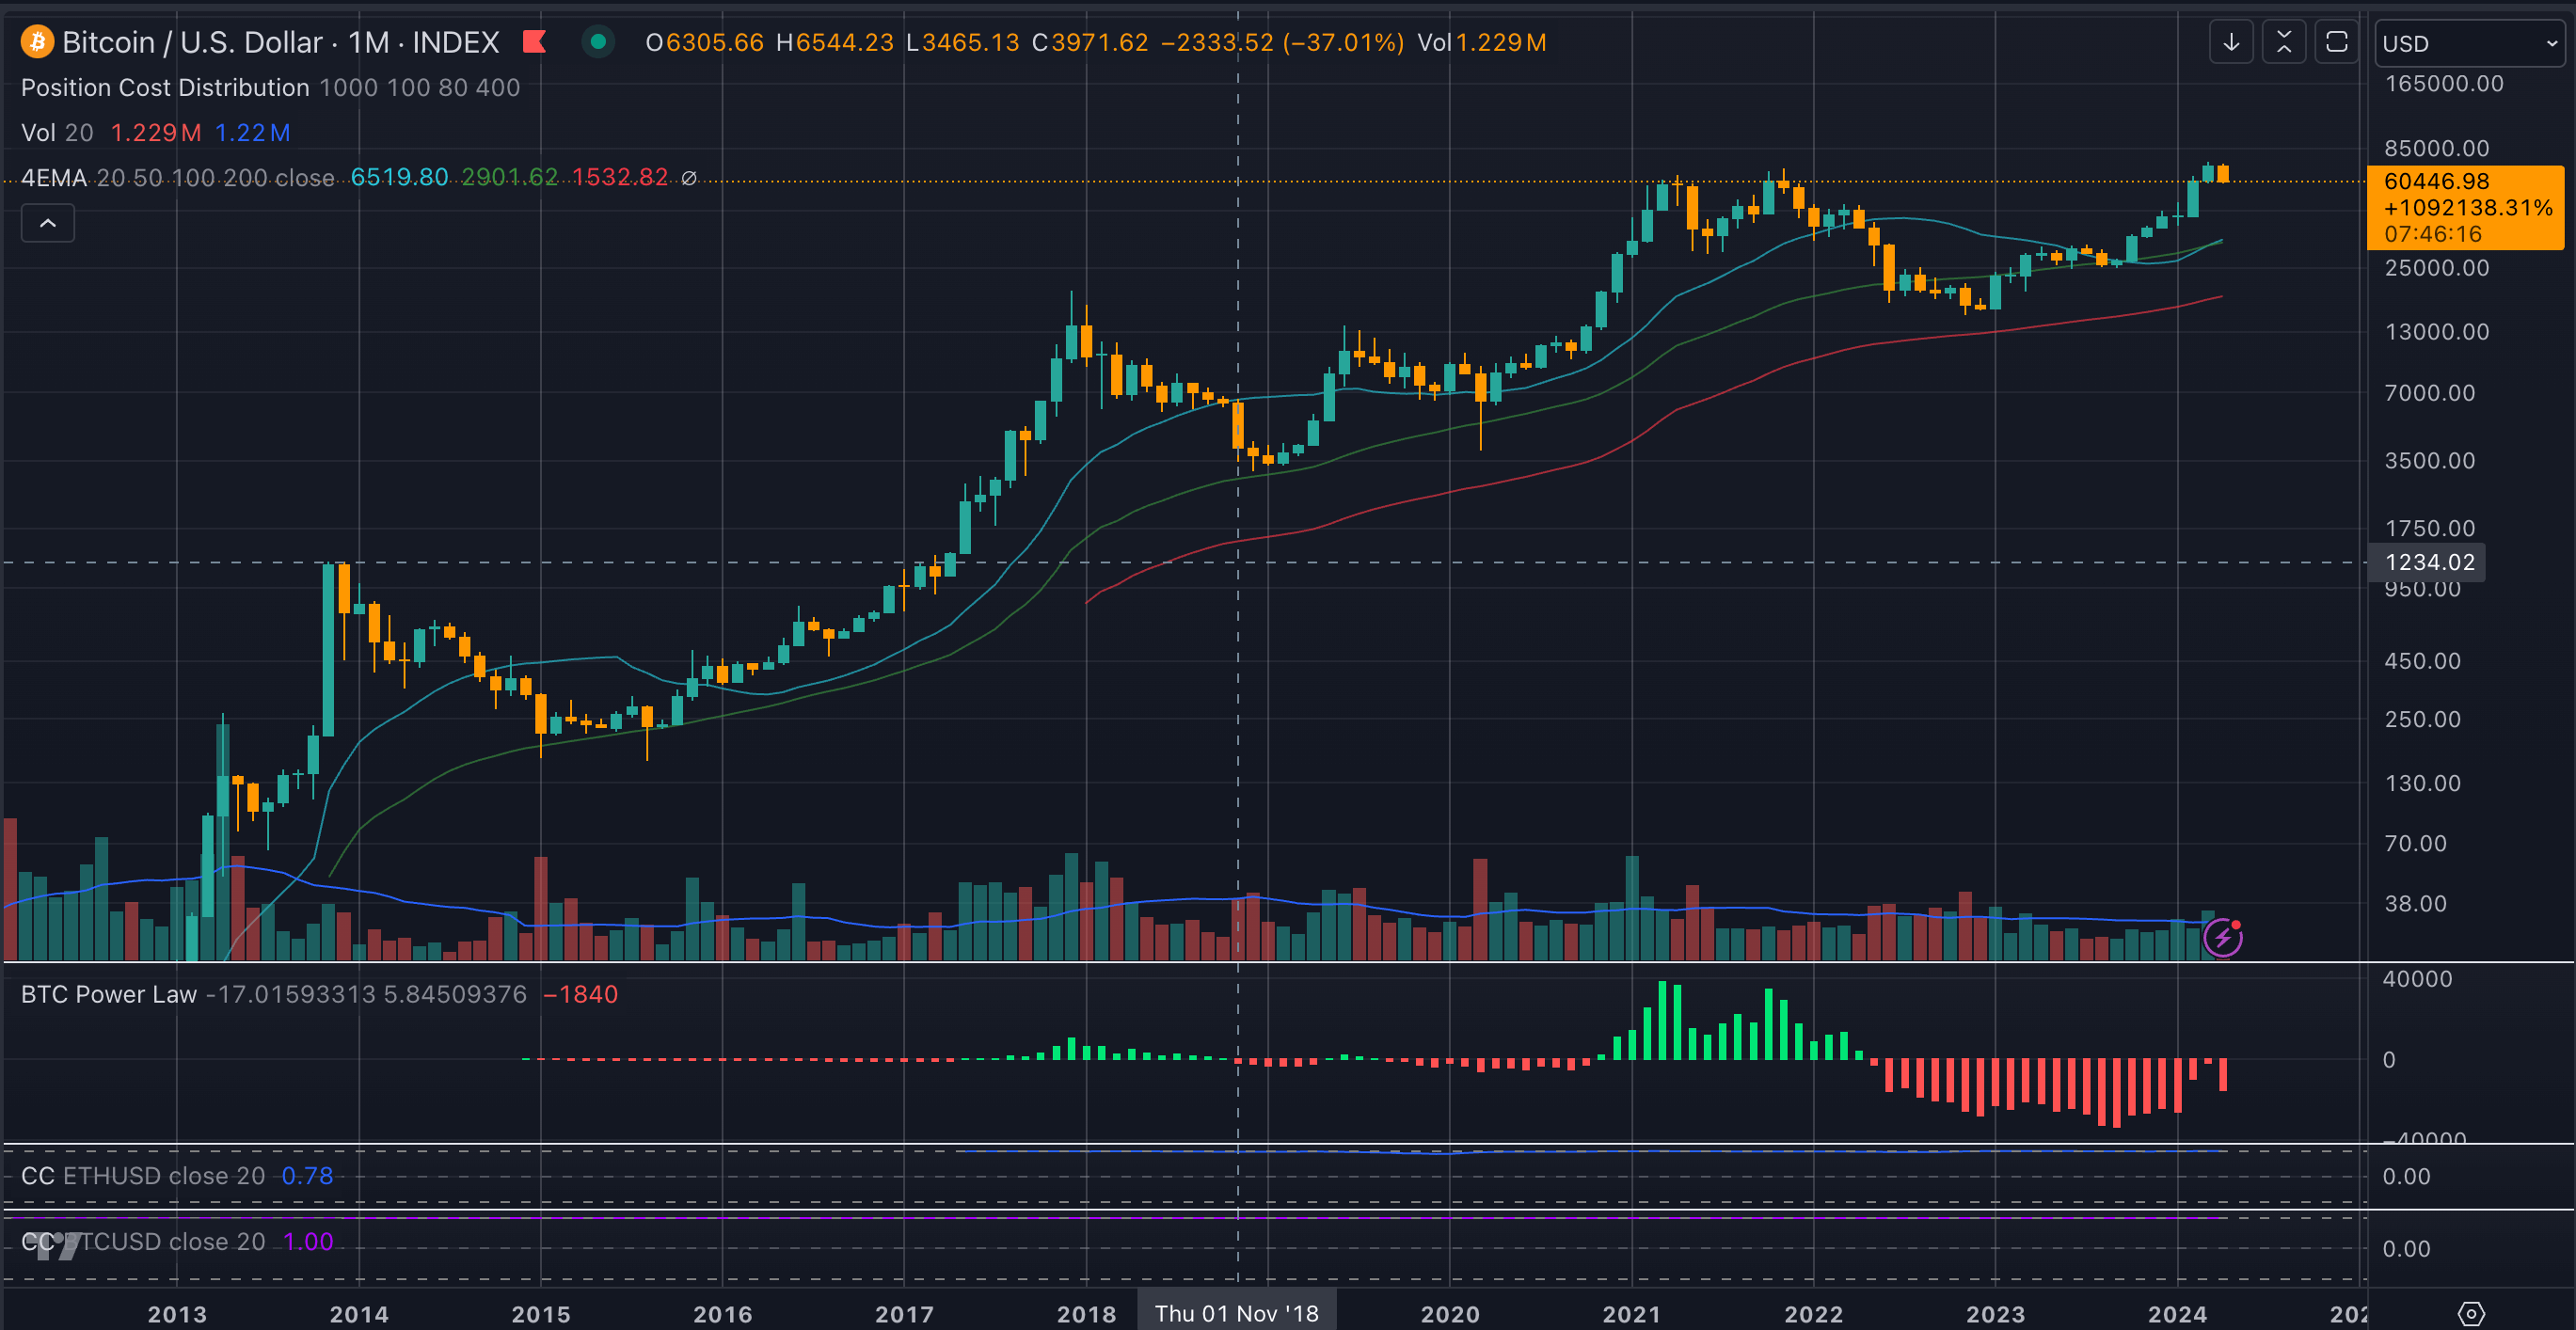 Bitcoin retraces back to critical monthly all-time high support level from 2021